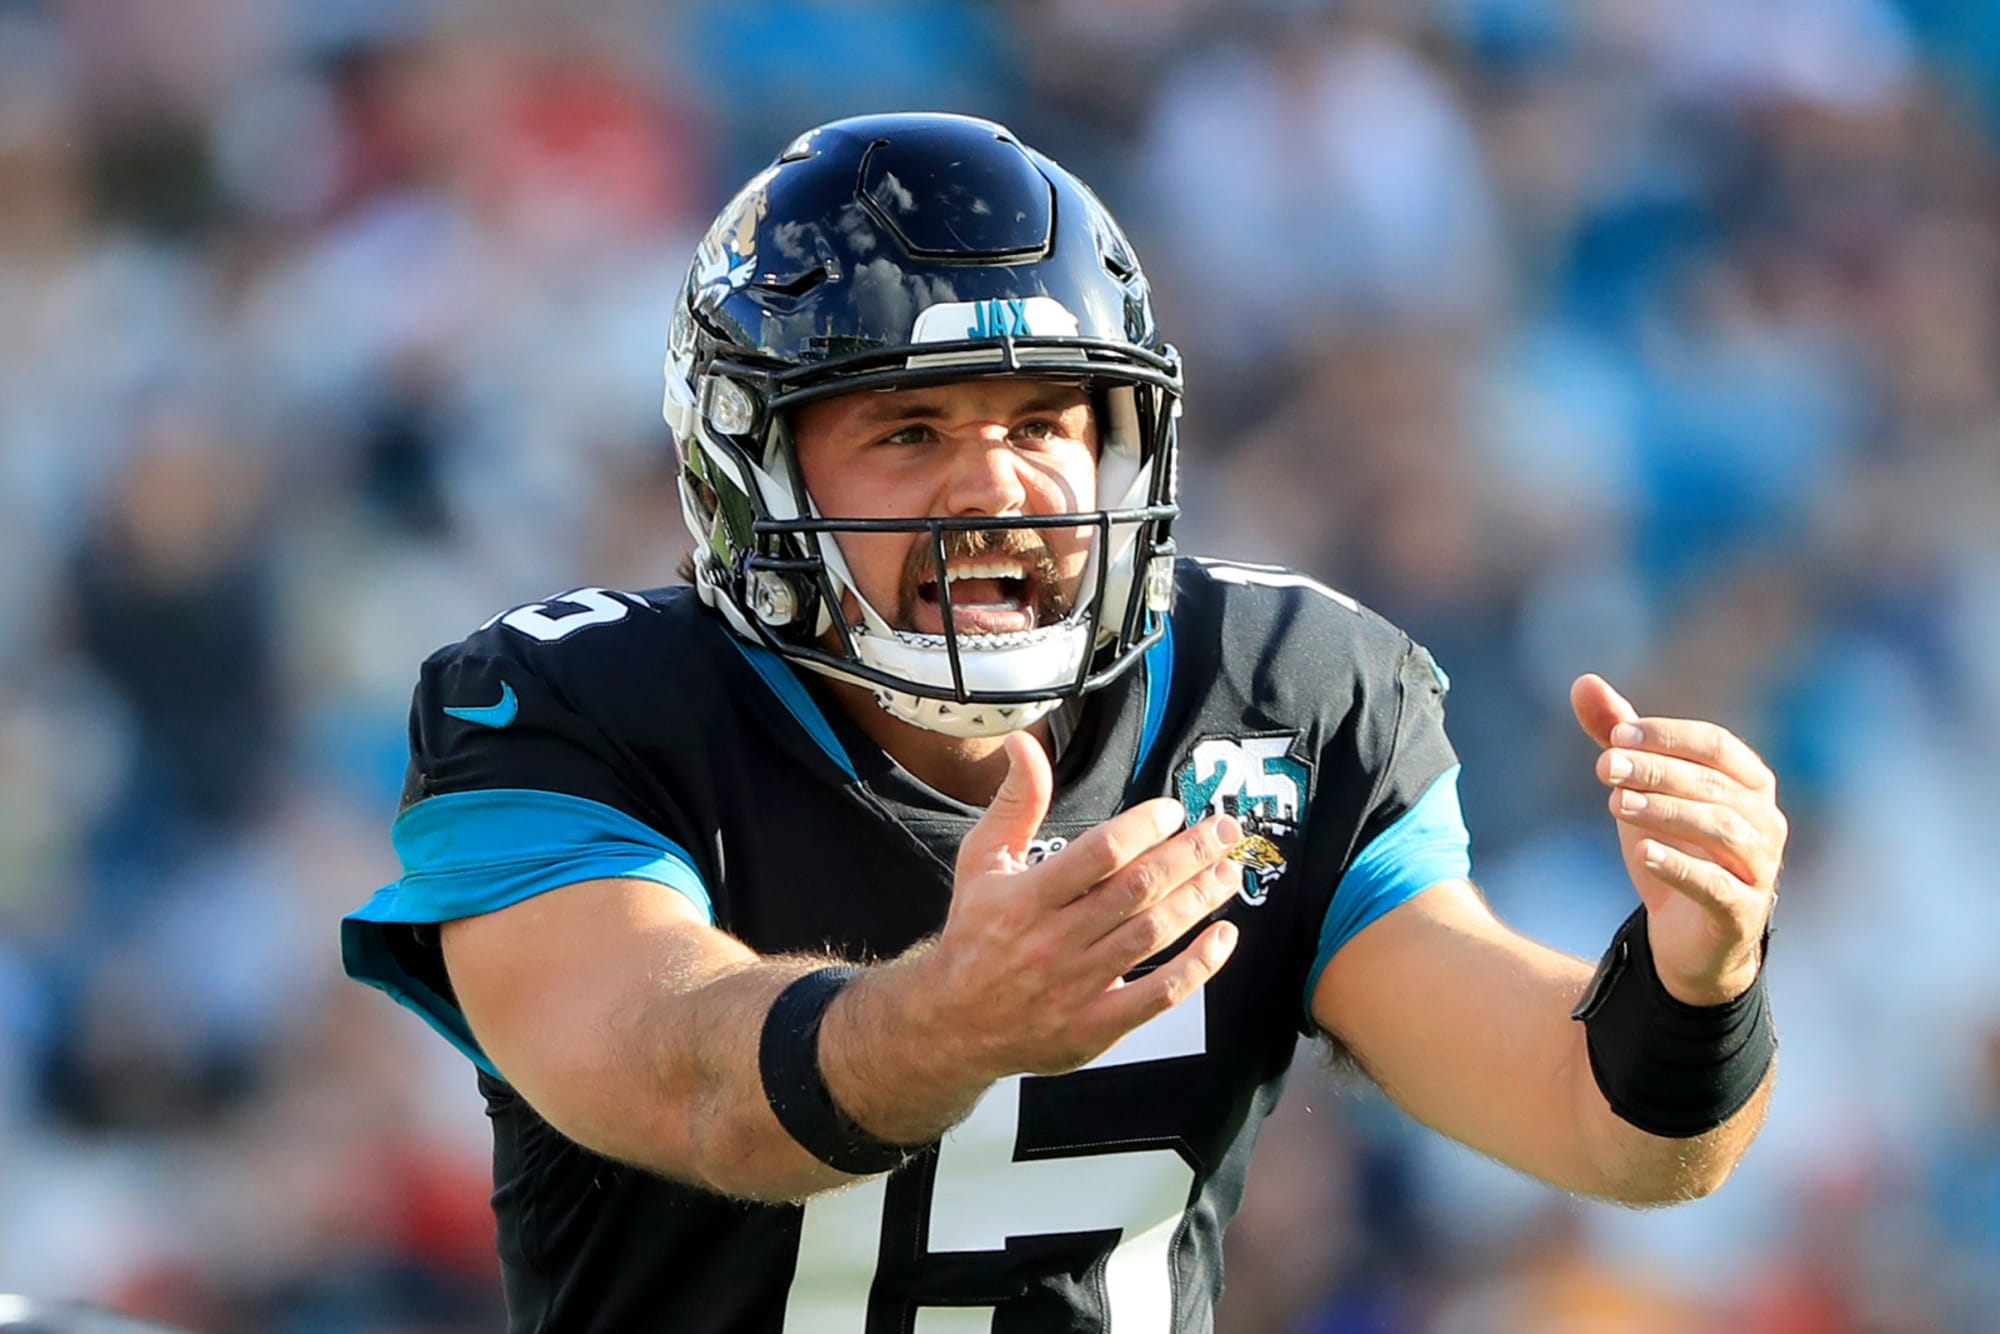 Jaguars QB moves up in latest FanSided.com rankings